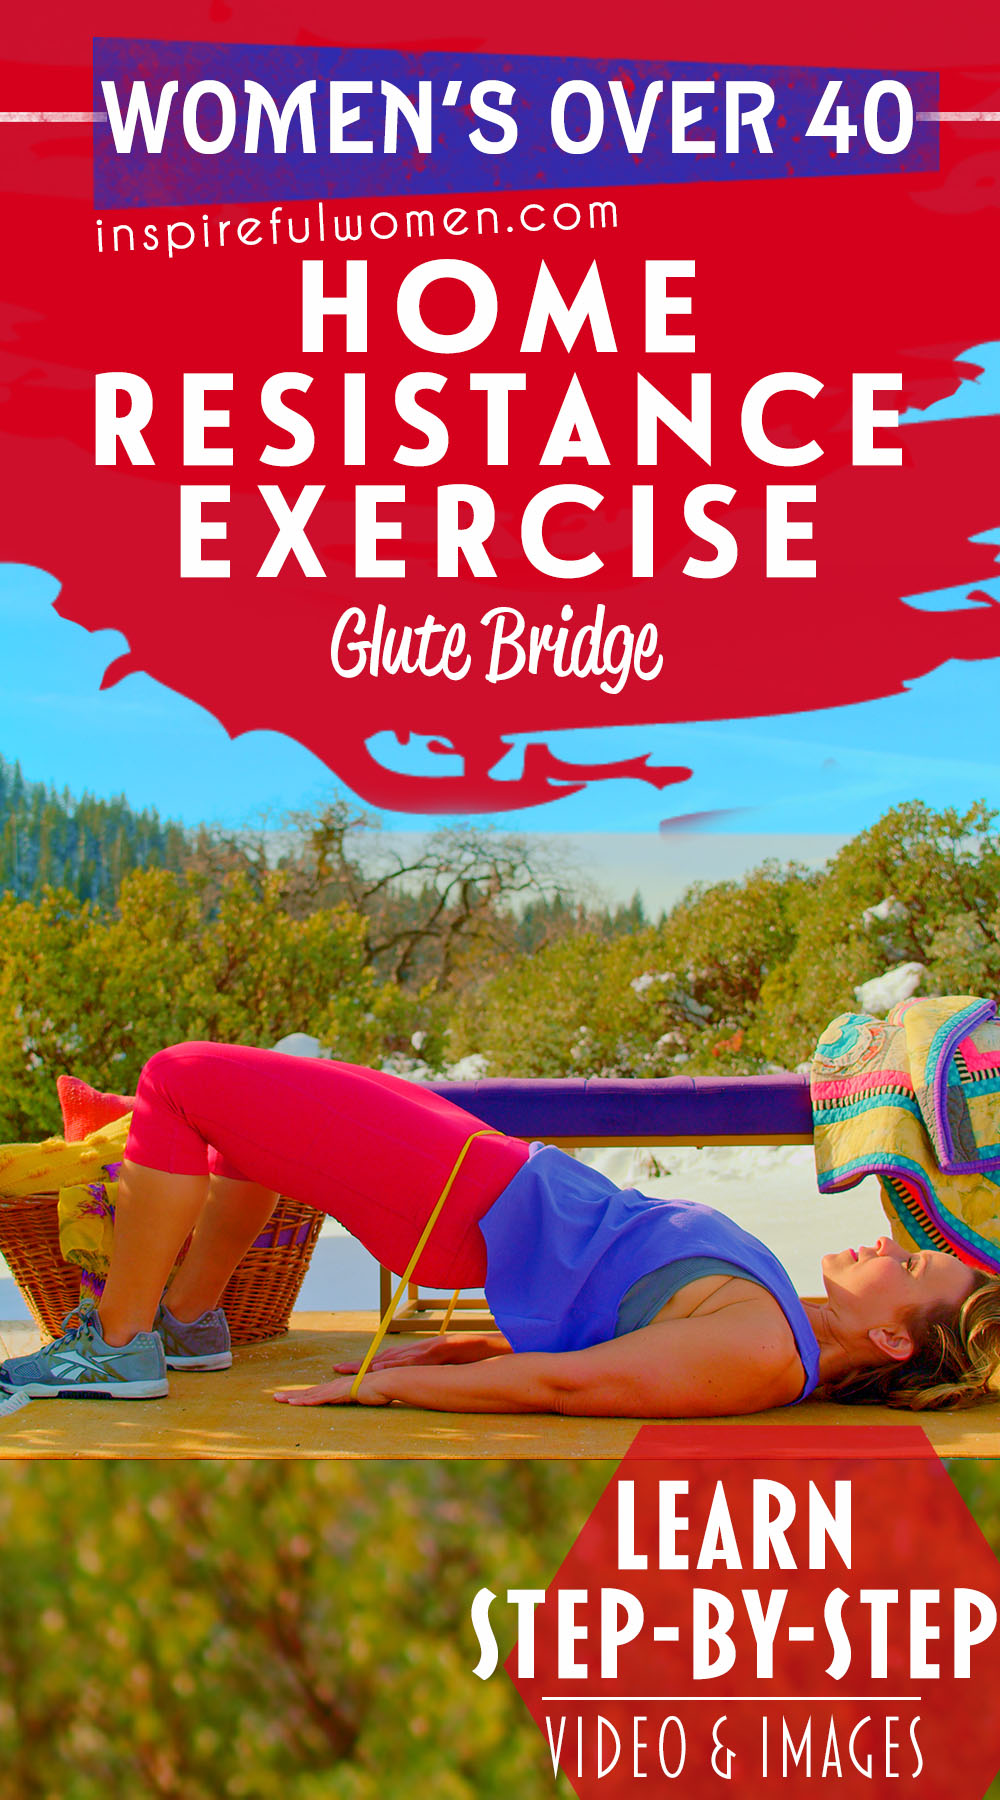 glute-bridge-ground-with-mini-band-under-hands-glute-activation-exercise-at-home-women-over-40